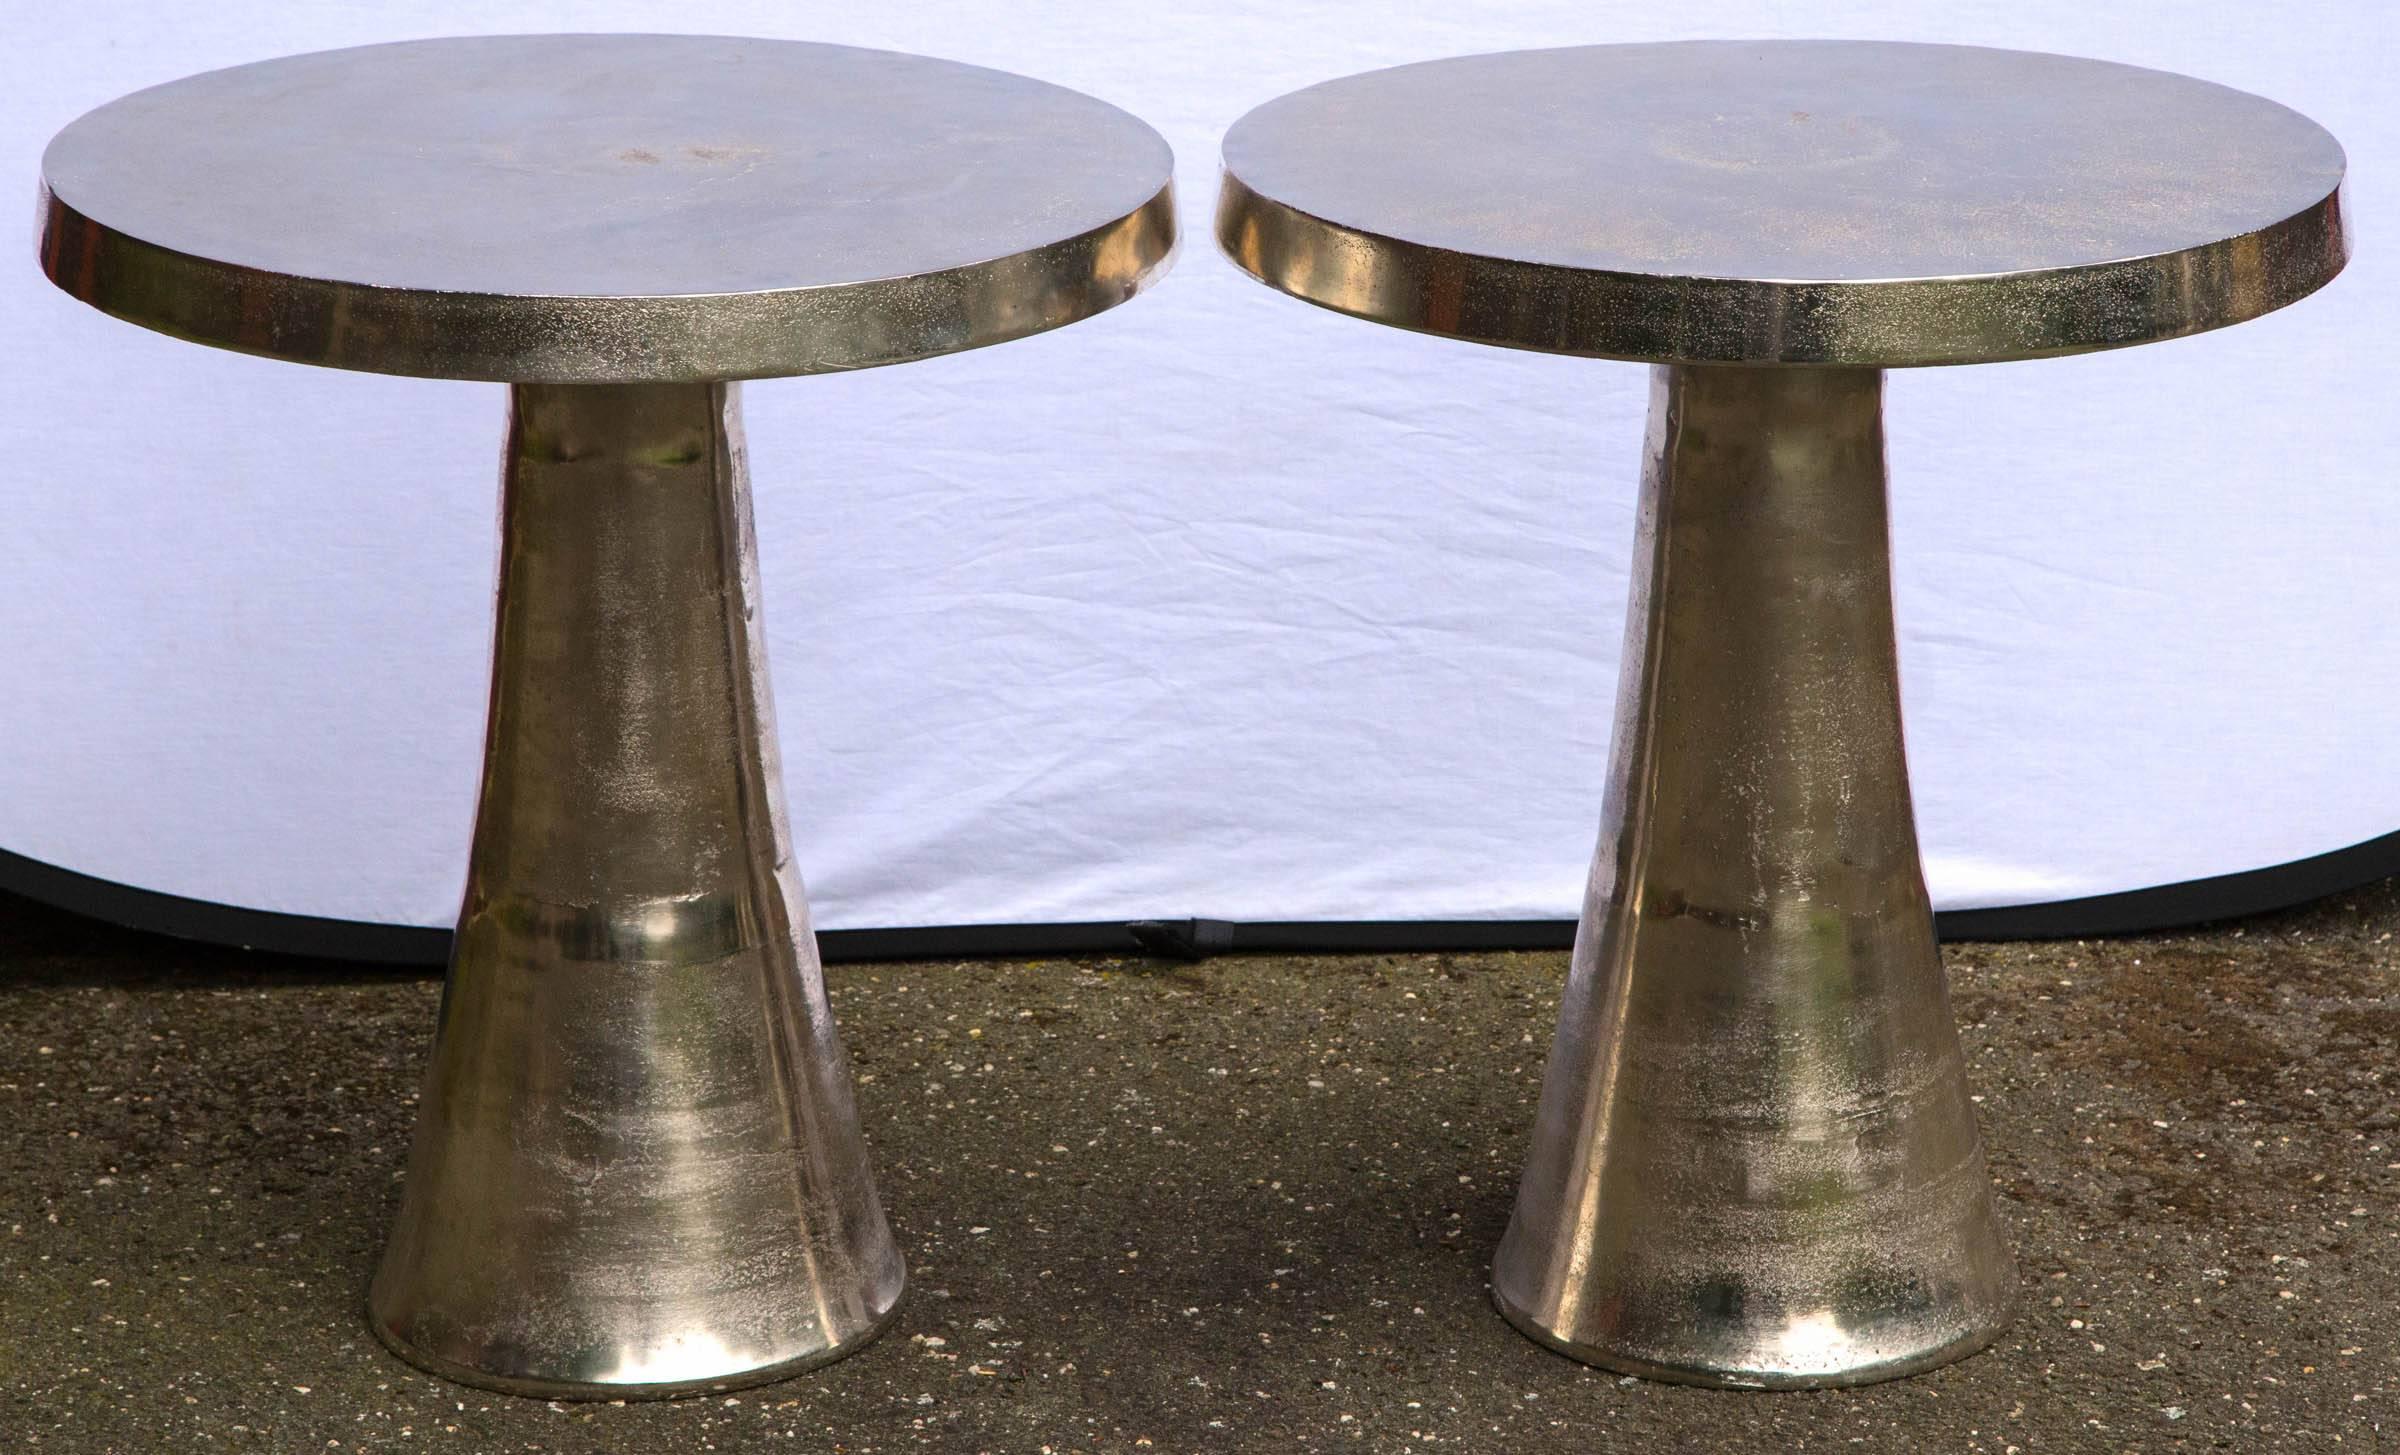 Unique pair of round polished stainless steel tables, with conical base.